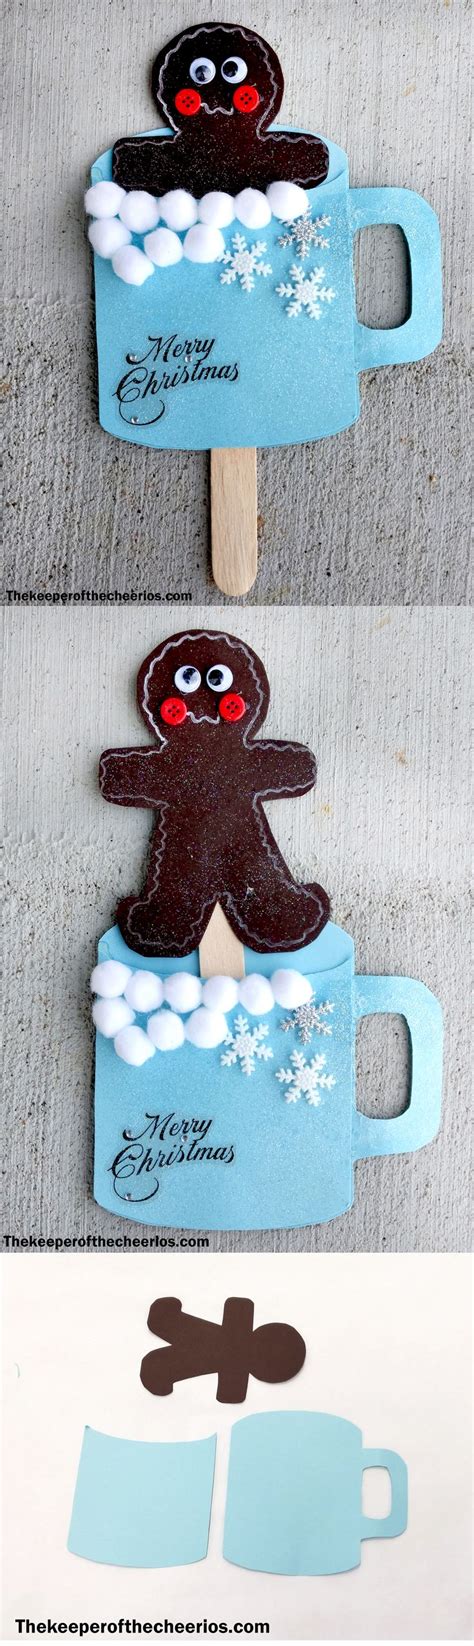 hot cocoa gingerbread man craft the keeper of the cheerios crafts gingerbread crafts